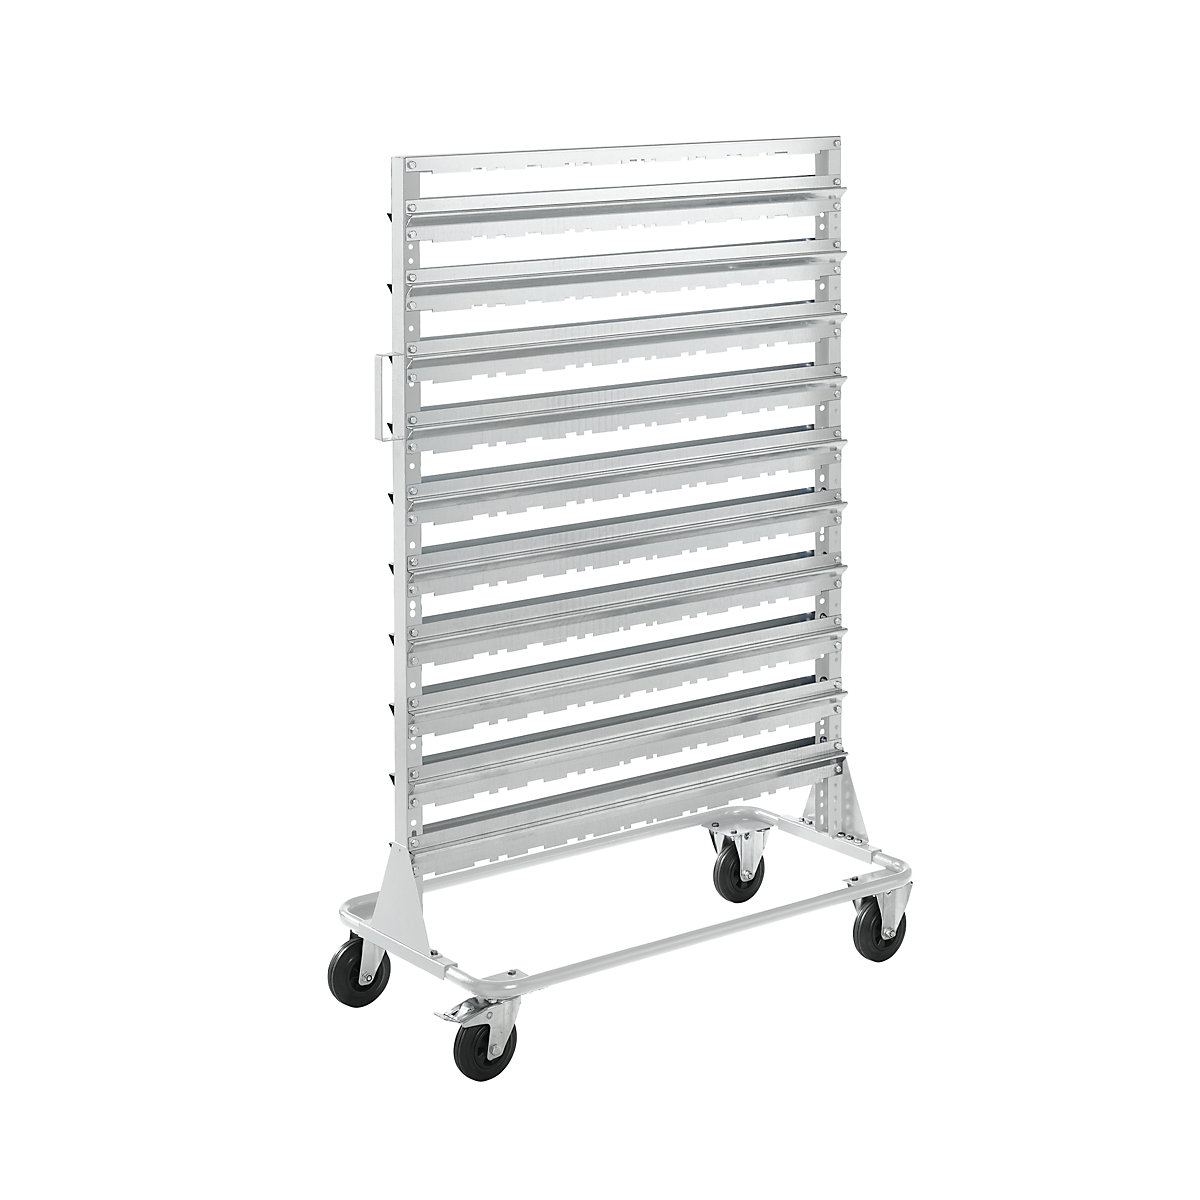 Mobile rack, height 1588 mm, mobile rack for 160 open fronted storage bins, light grey-4